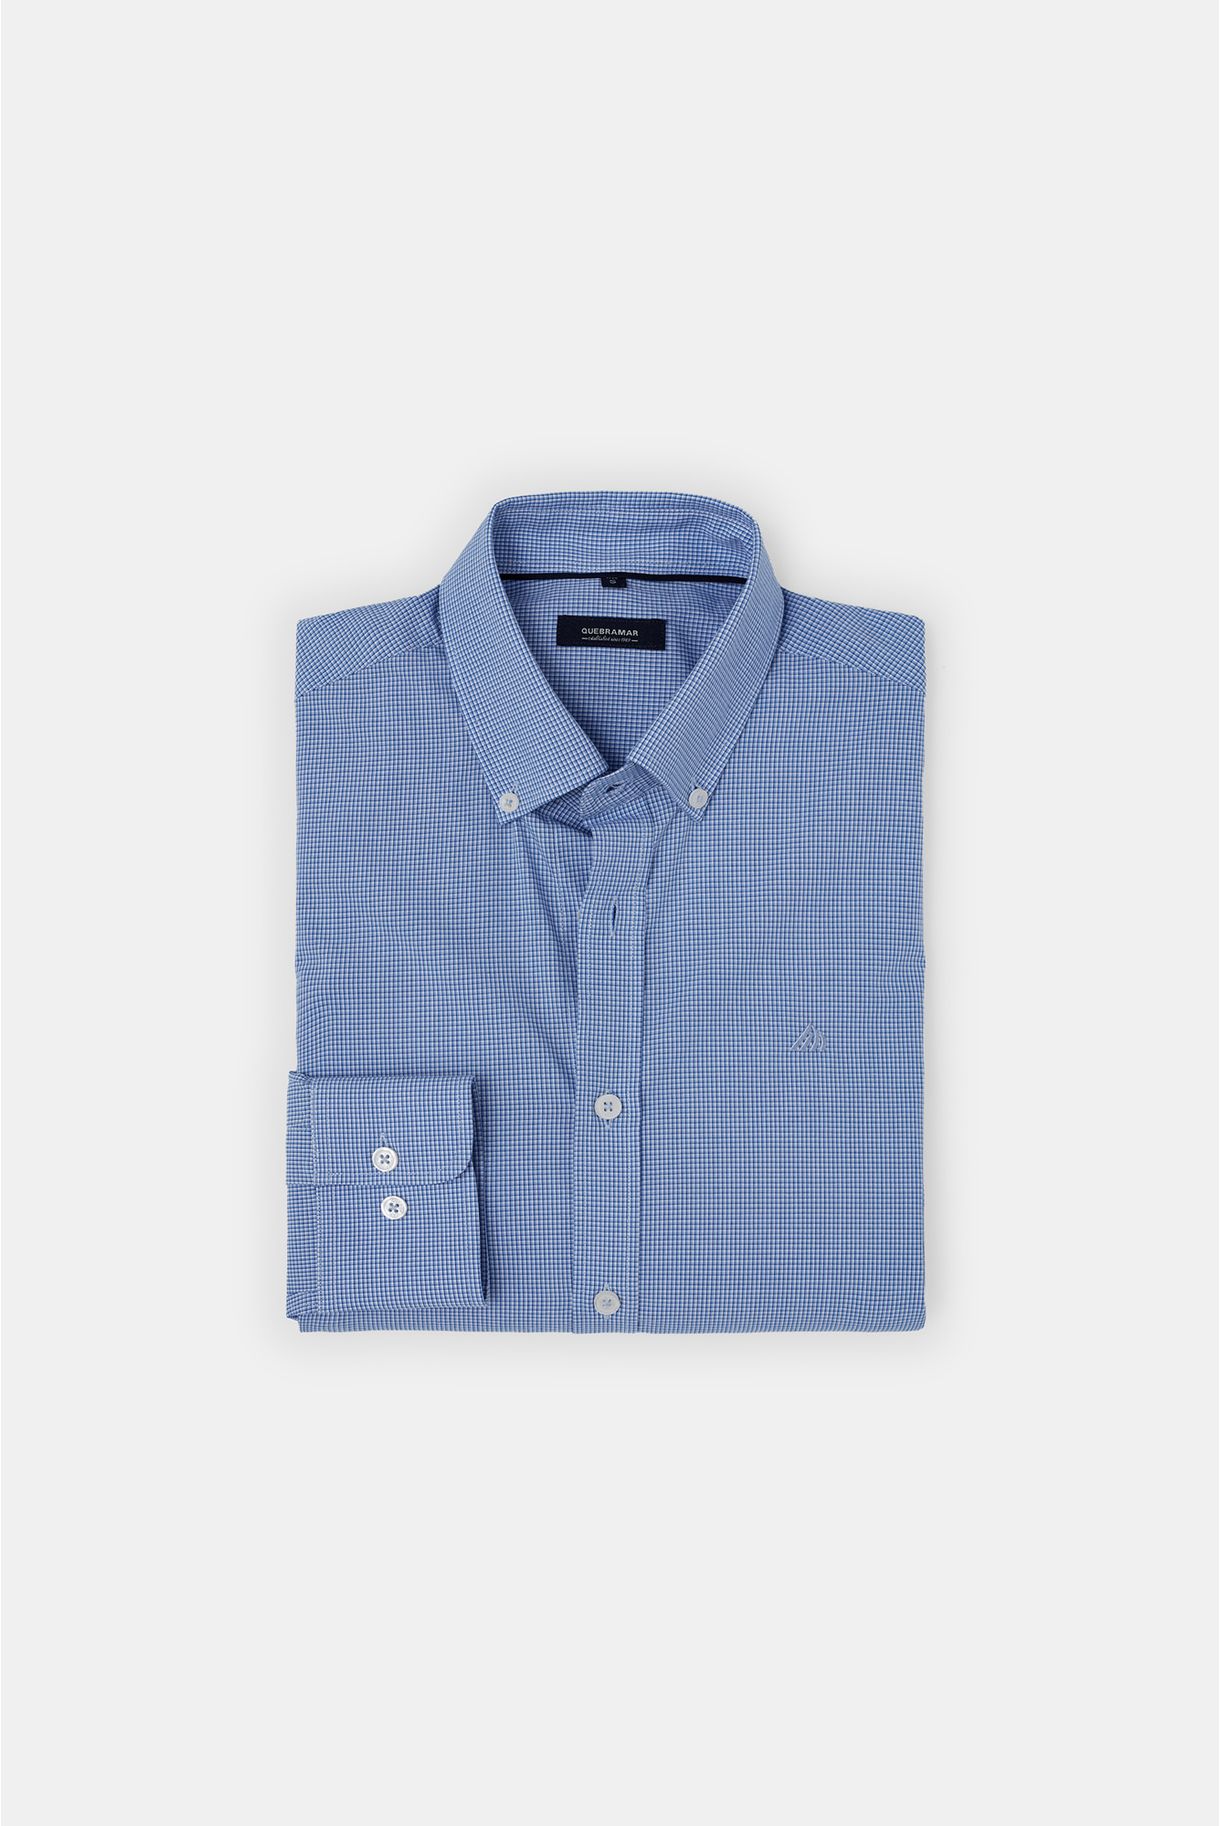 Men's shirt with micro squares